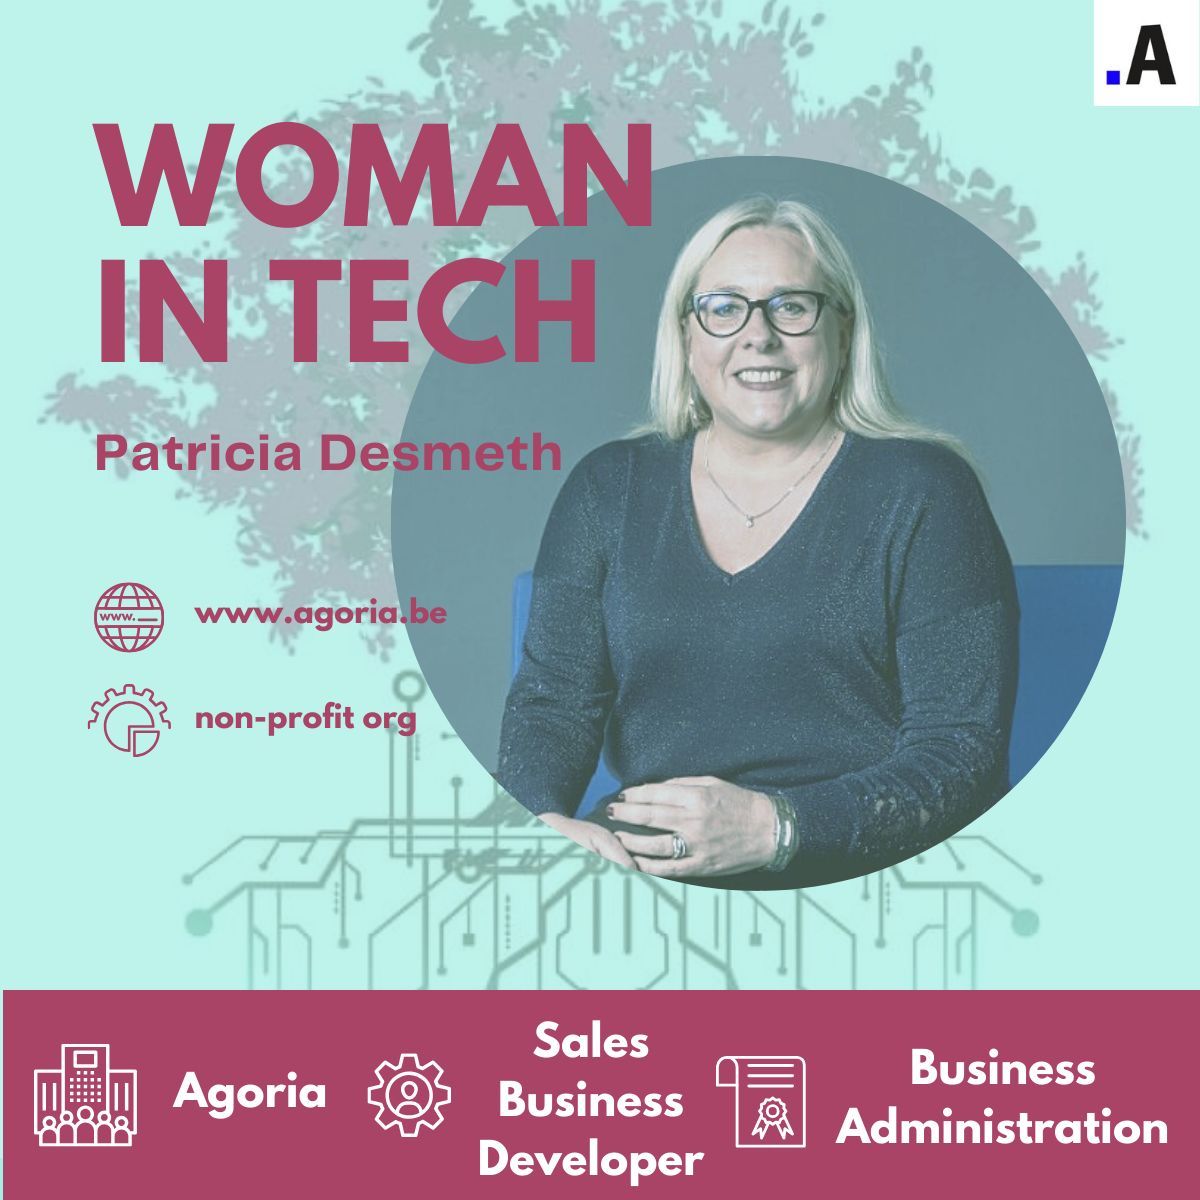 Two Women in Tech today: Helena Bal and @PatriciaDesmeth, in charge of member recruitment at @Agoriafr @Agorianl More inspiration: buff.ly/3kLtxBa Part of the #365womenintech campaign to spotlight 1 female founder/CEO/employee every day #BEWomenInTech #Rolemodel